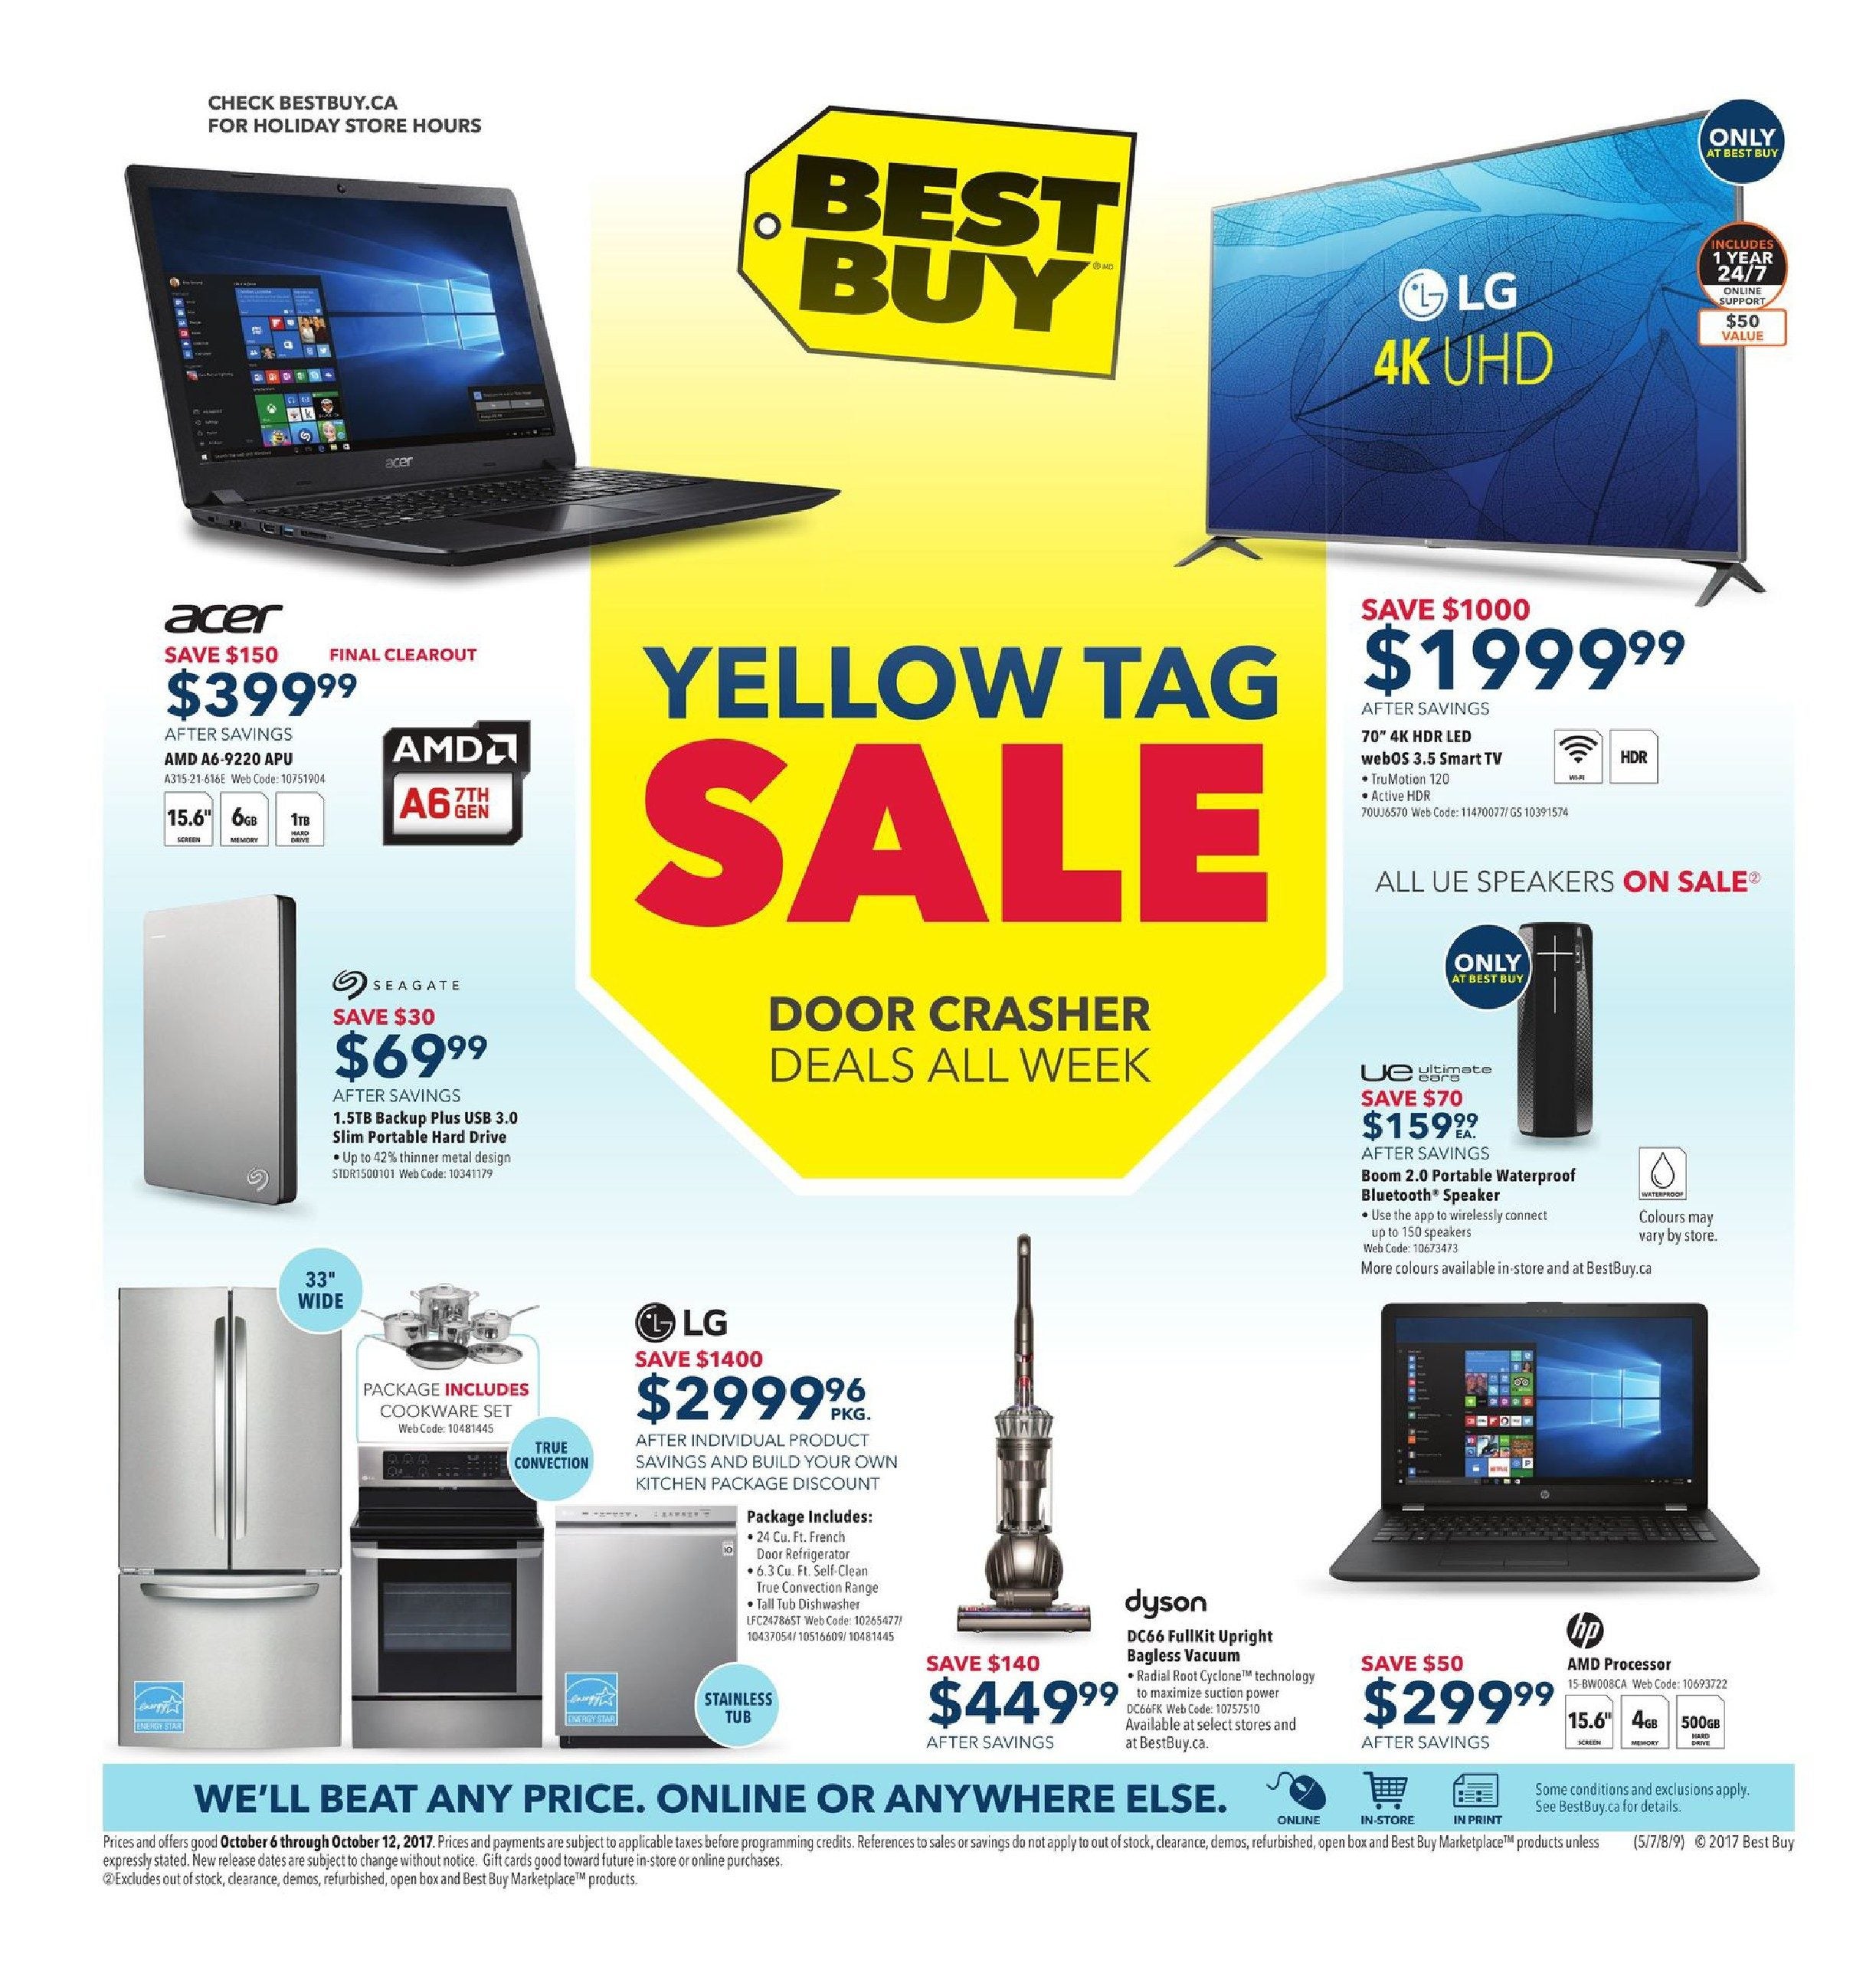 Best Buy Weekly Flyer - Weekly - Yellow Tag Sale - Oct 6 – 12